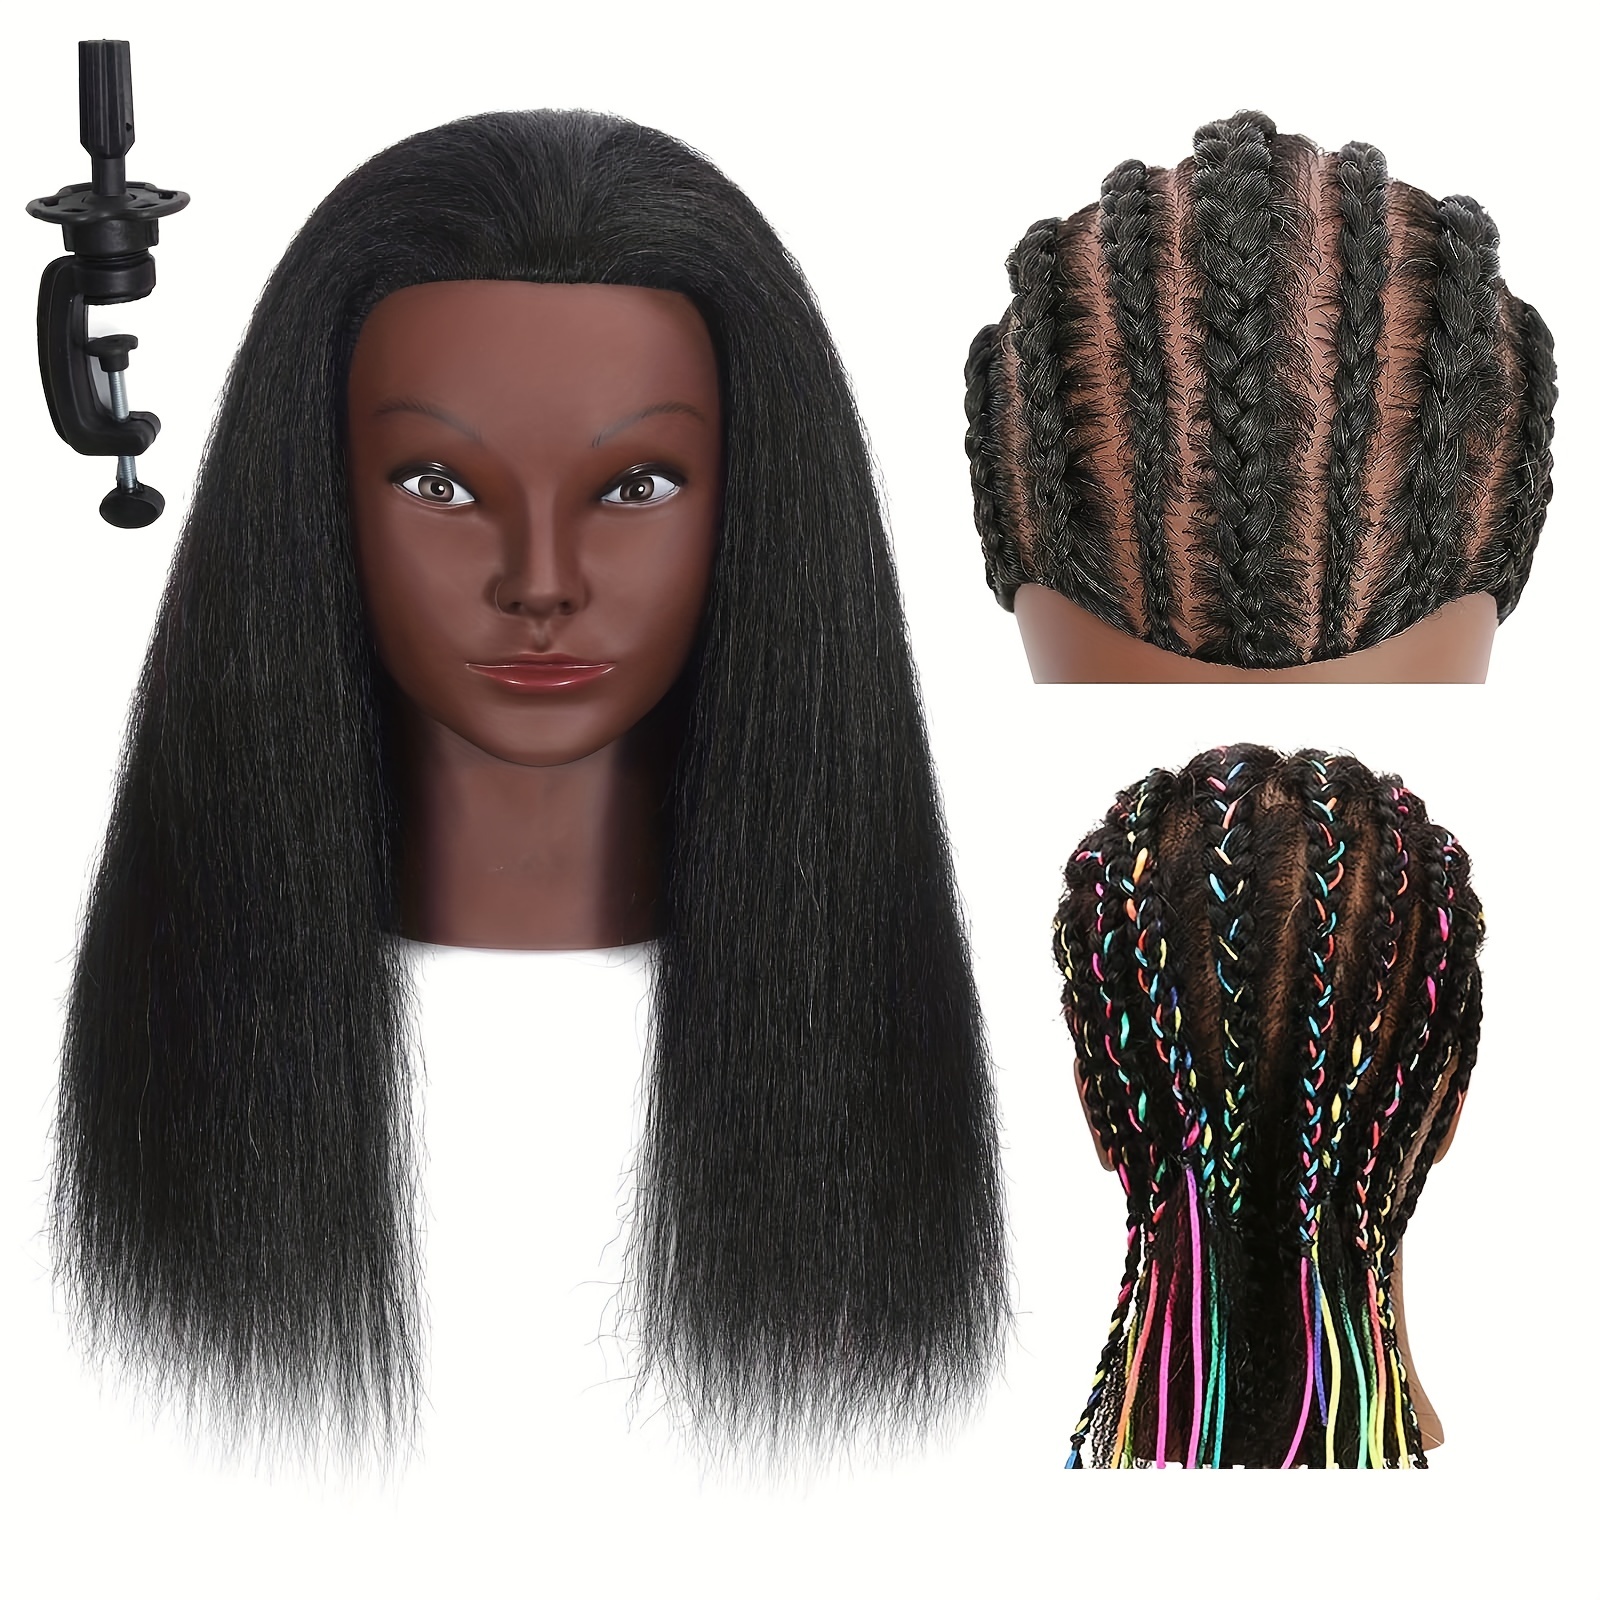 Afro Mannequin Head Curly Hair 100% African American Human Hair Practice  Braiding Styling Doll Head With Stand Tripod Or Metal S